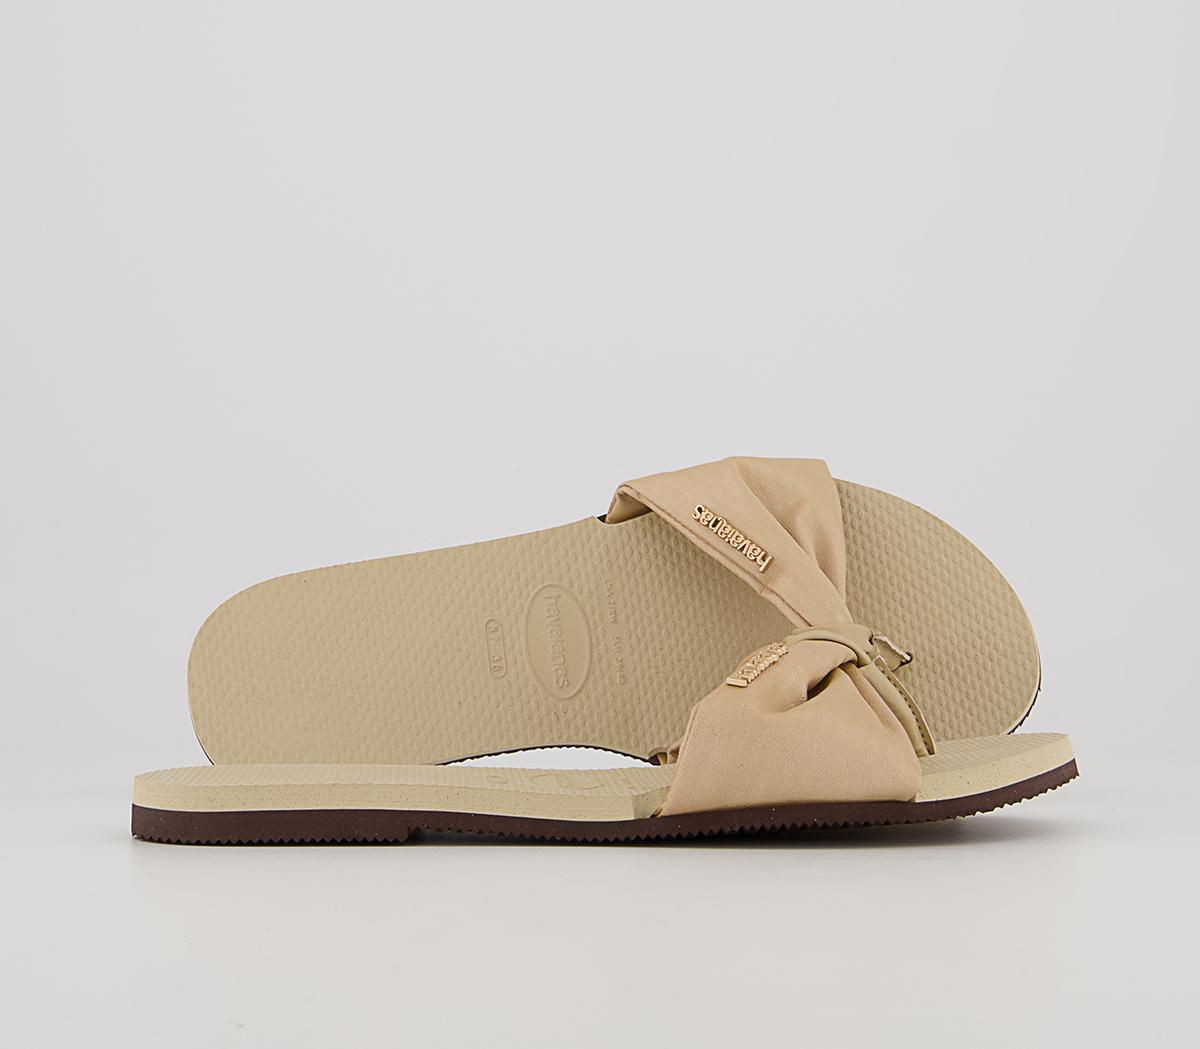 You St Tropez Lush Sliders Sand Grey Rubber